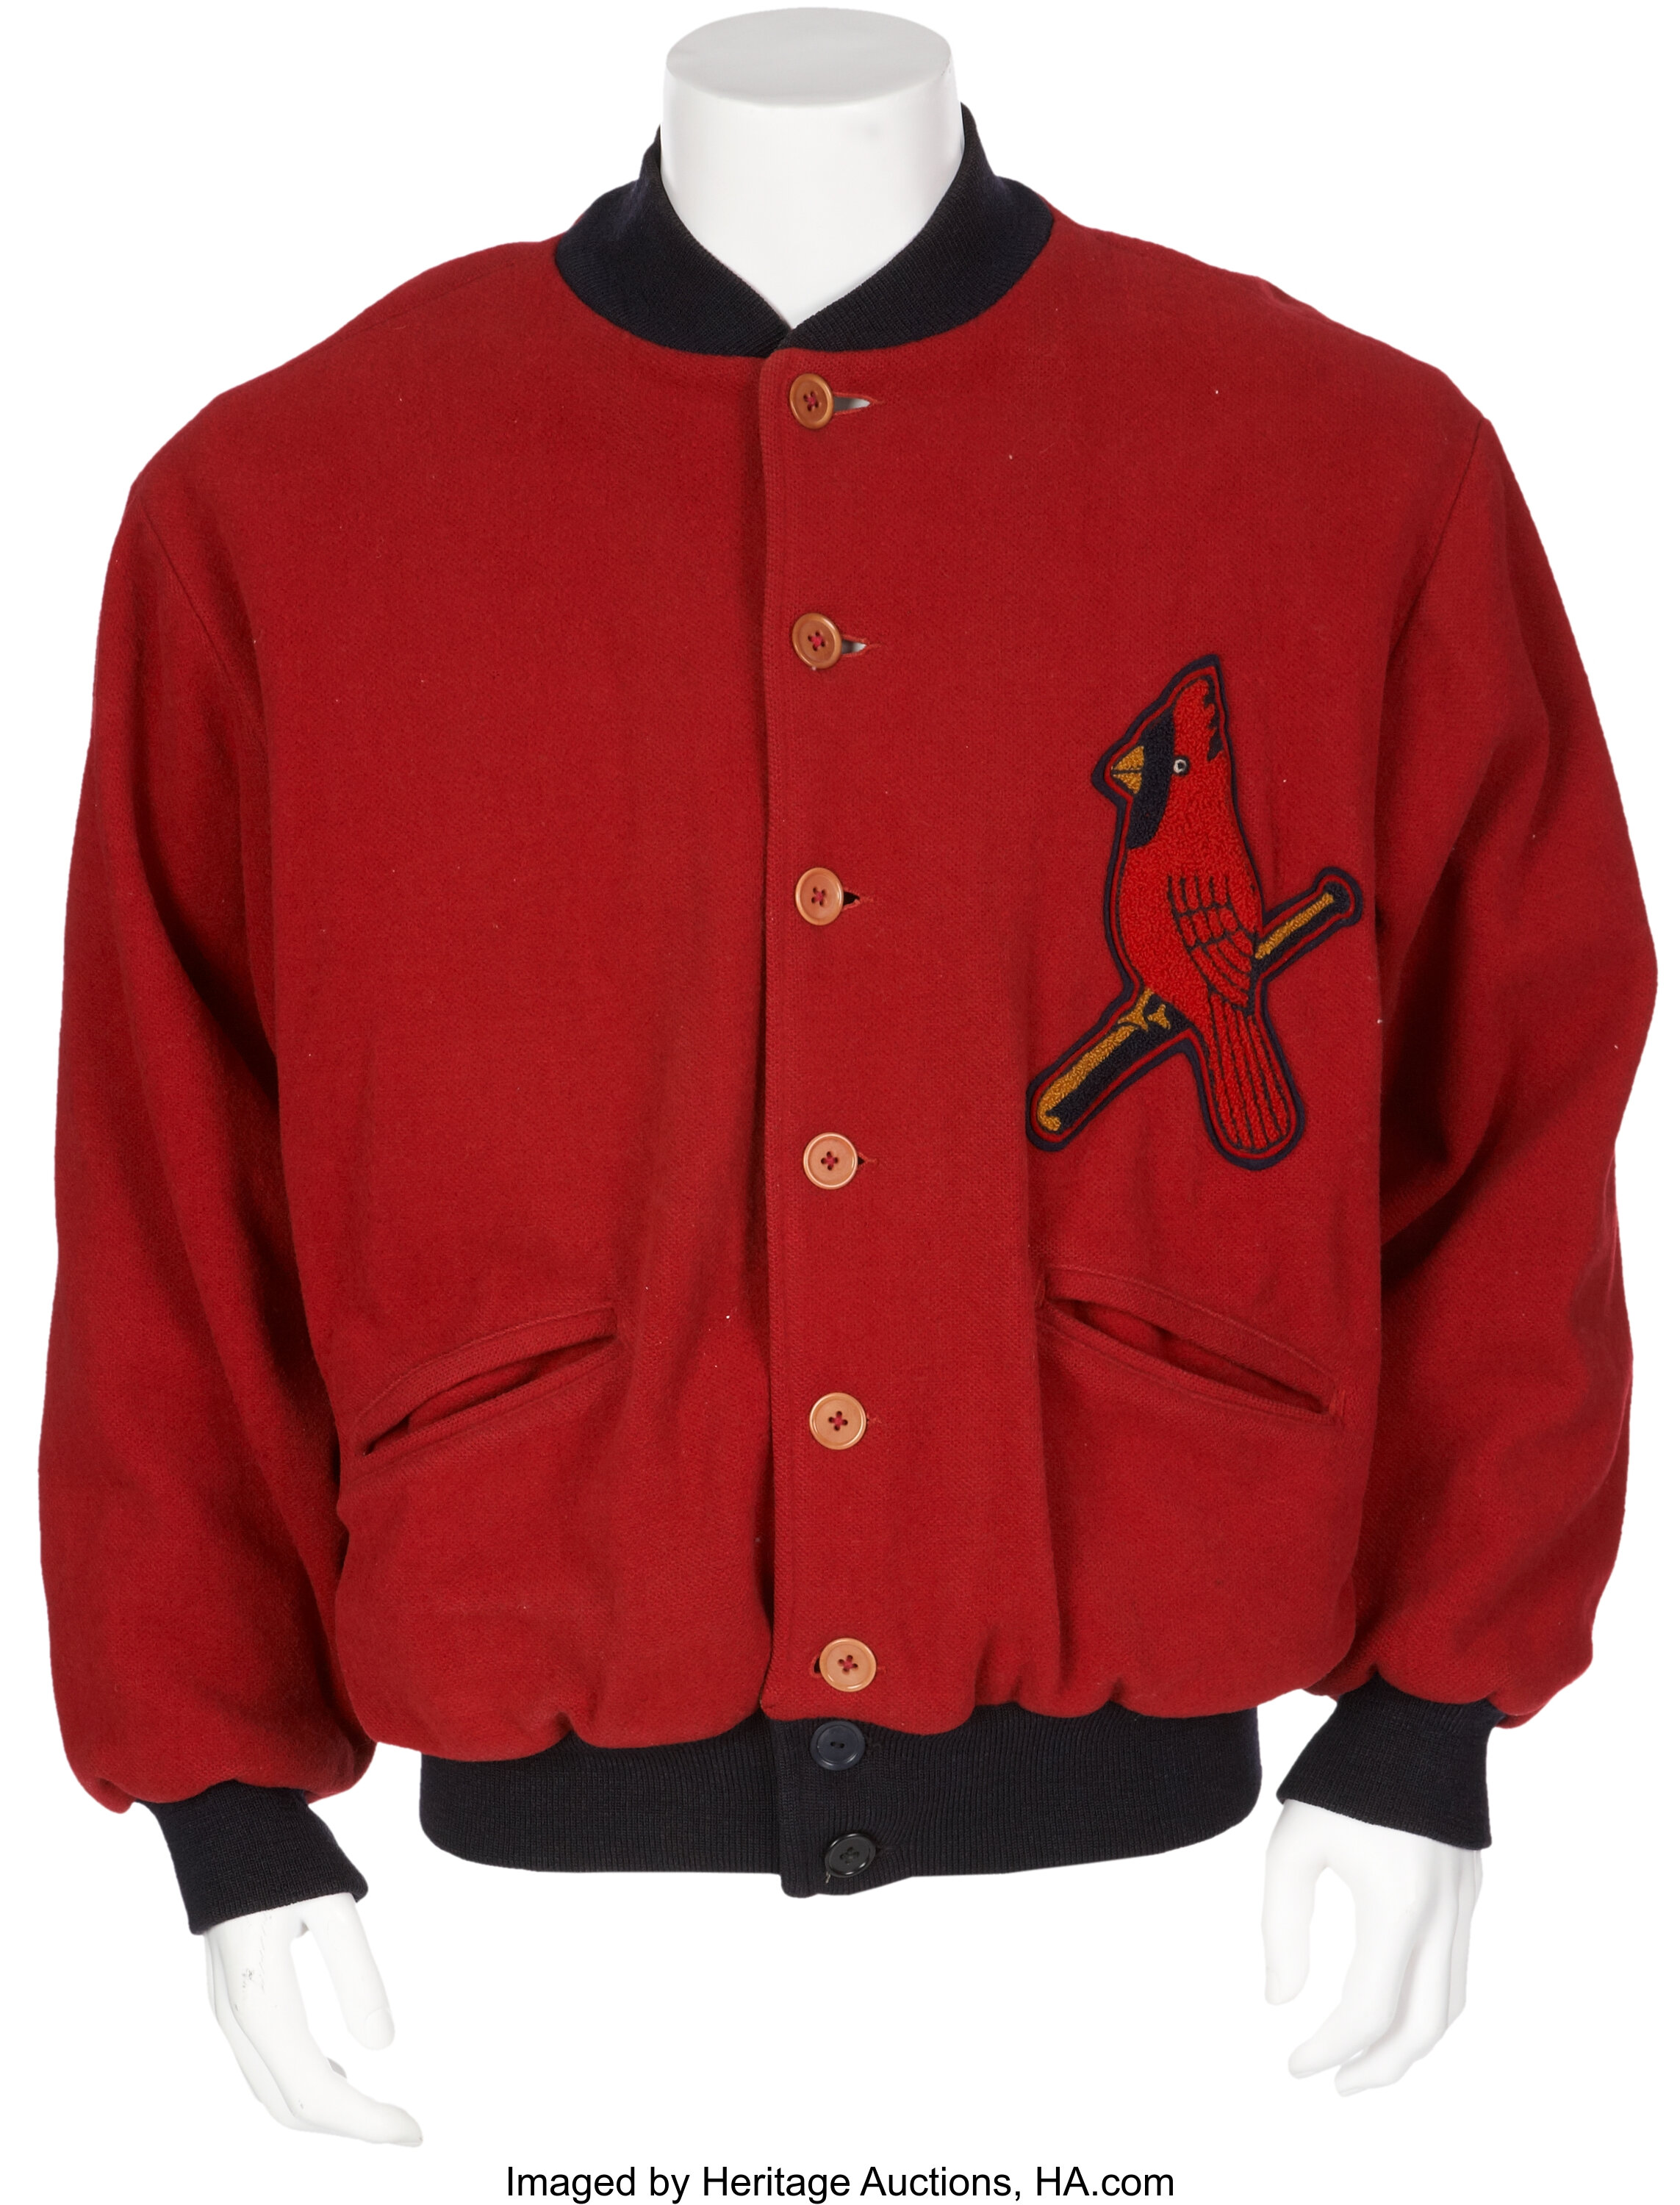 1950's-1960's Game Worn St. Louis Cardinals Jackets Lot of 2 - One